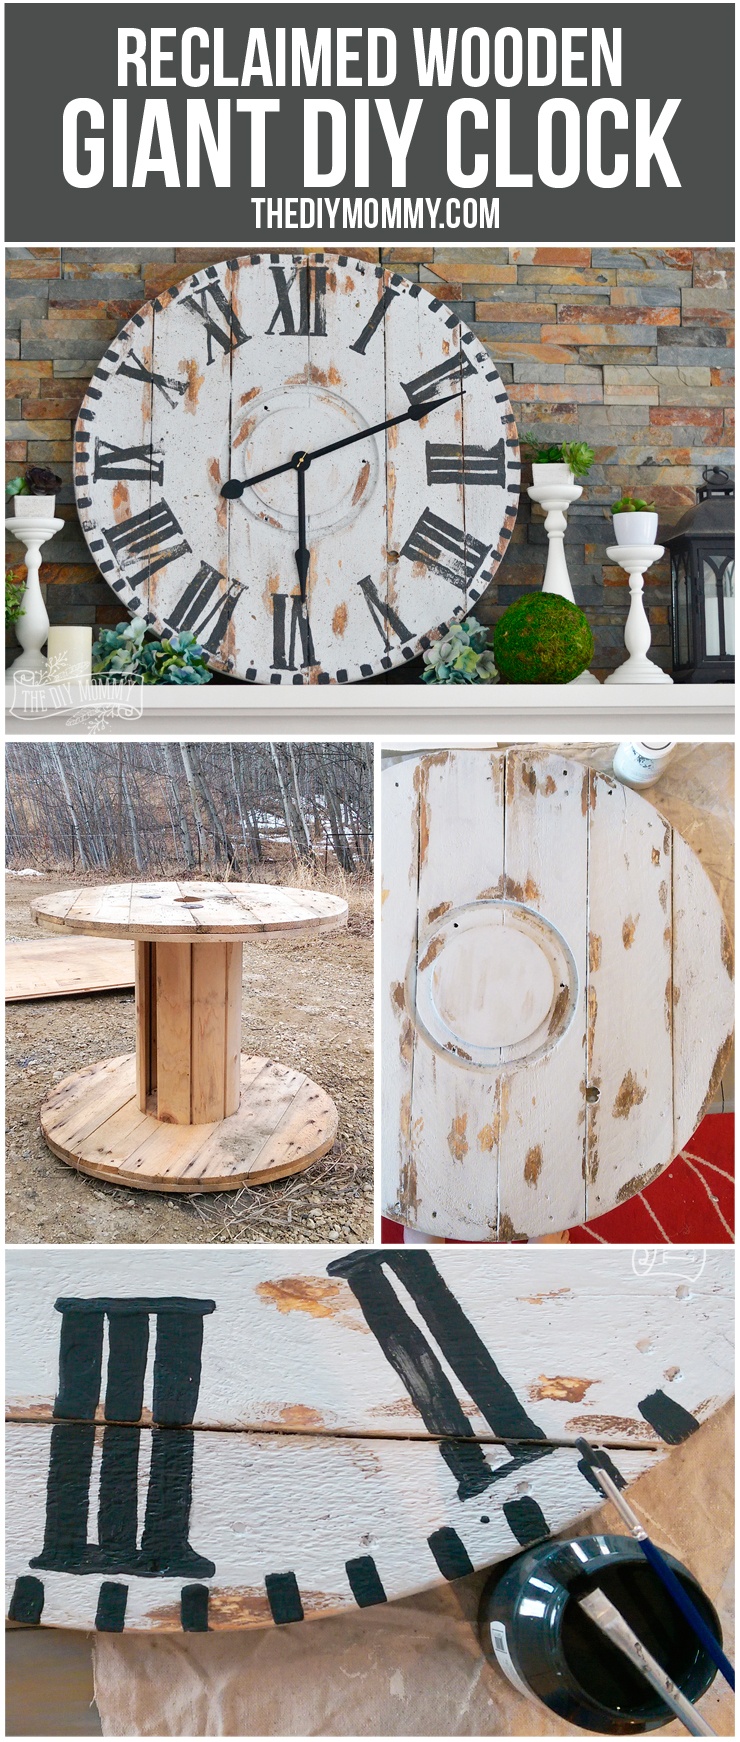 Giant Reclaimed Wood Clock from an Electrical Reel